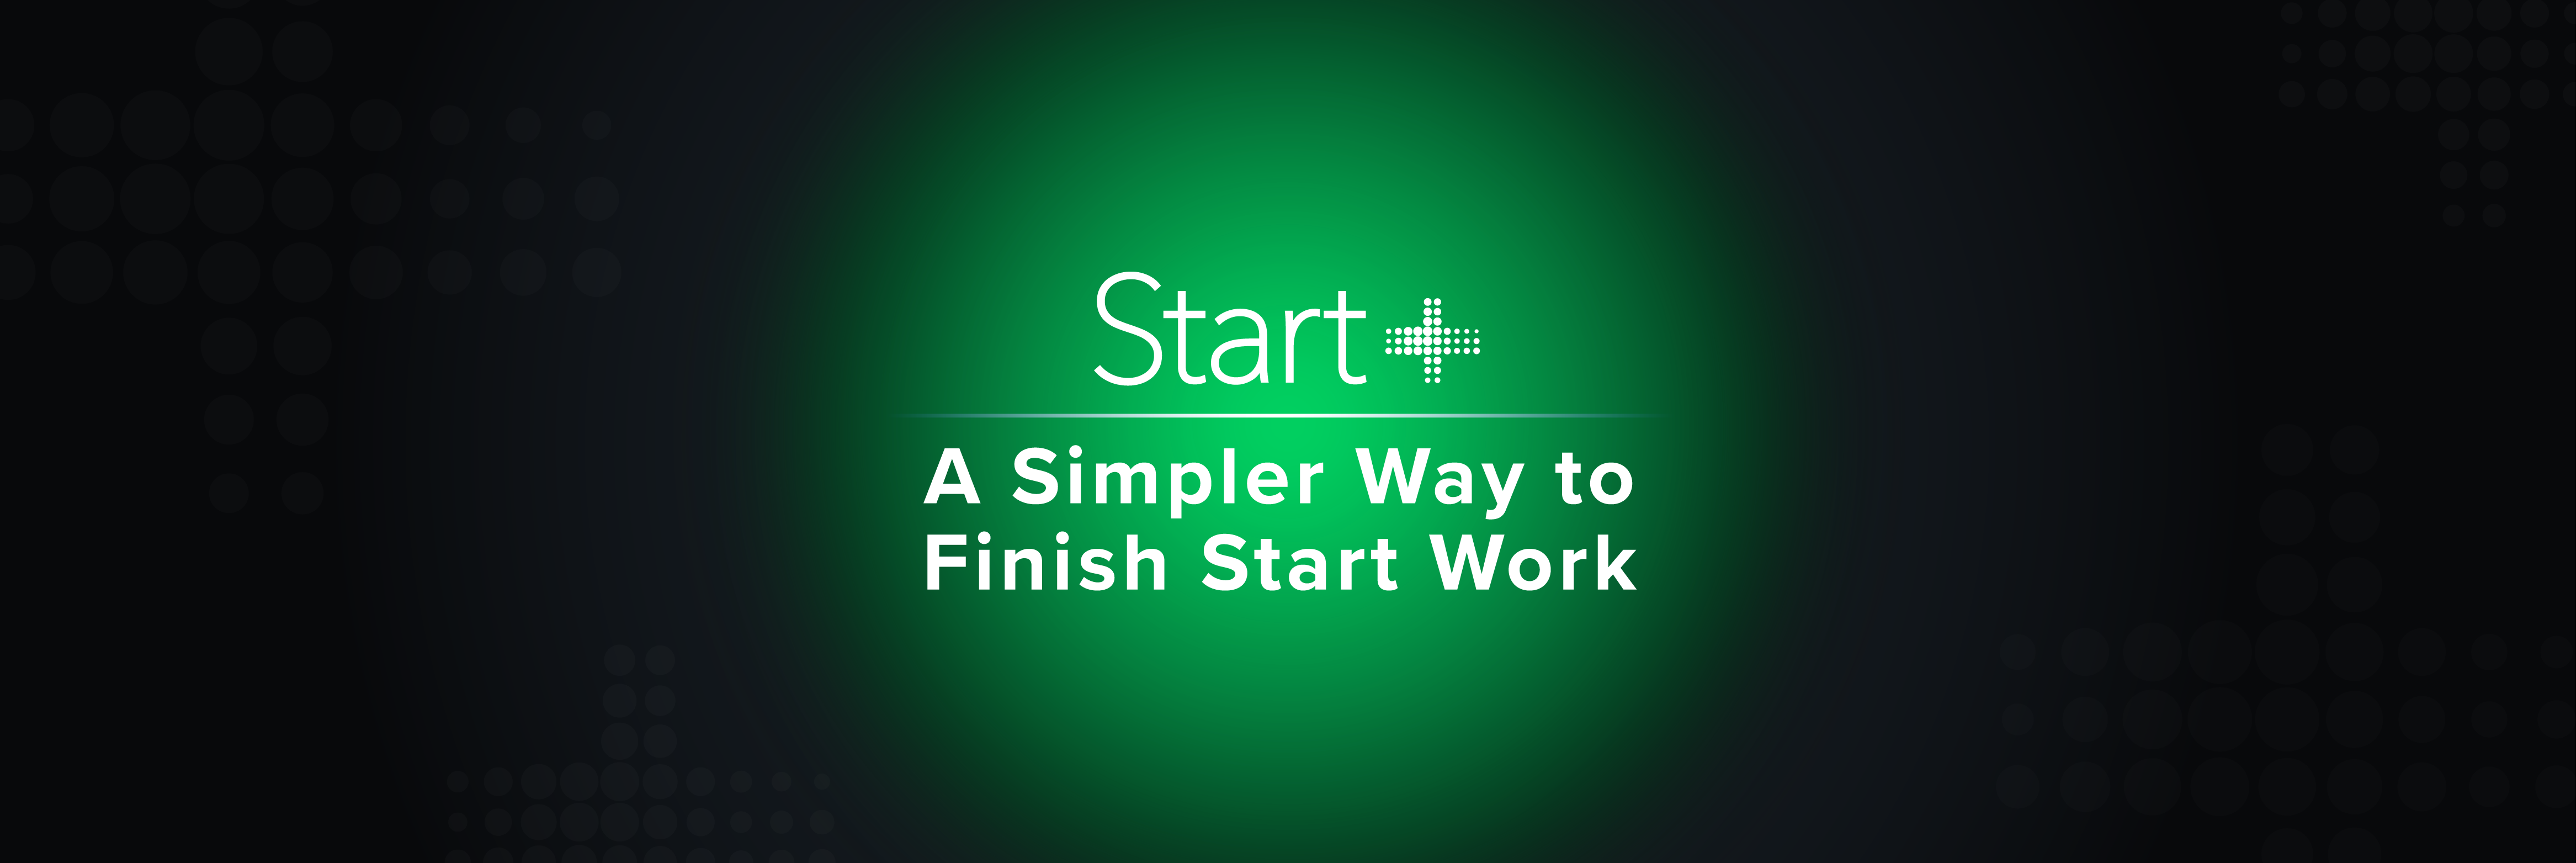 green graphic highlighting the Start+ onboarding crew solution from Cast & Crew